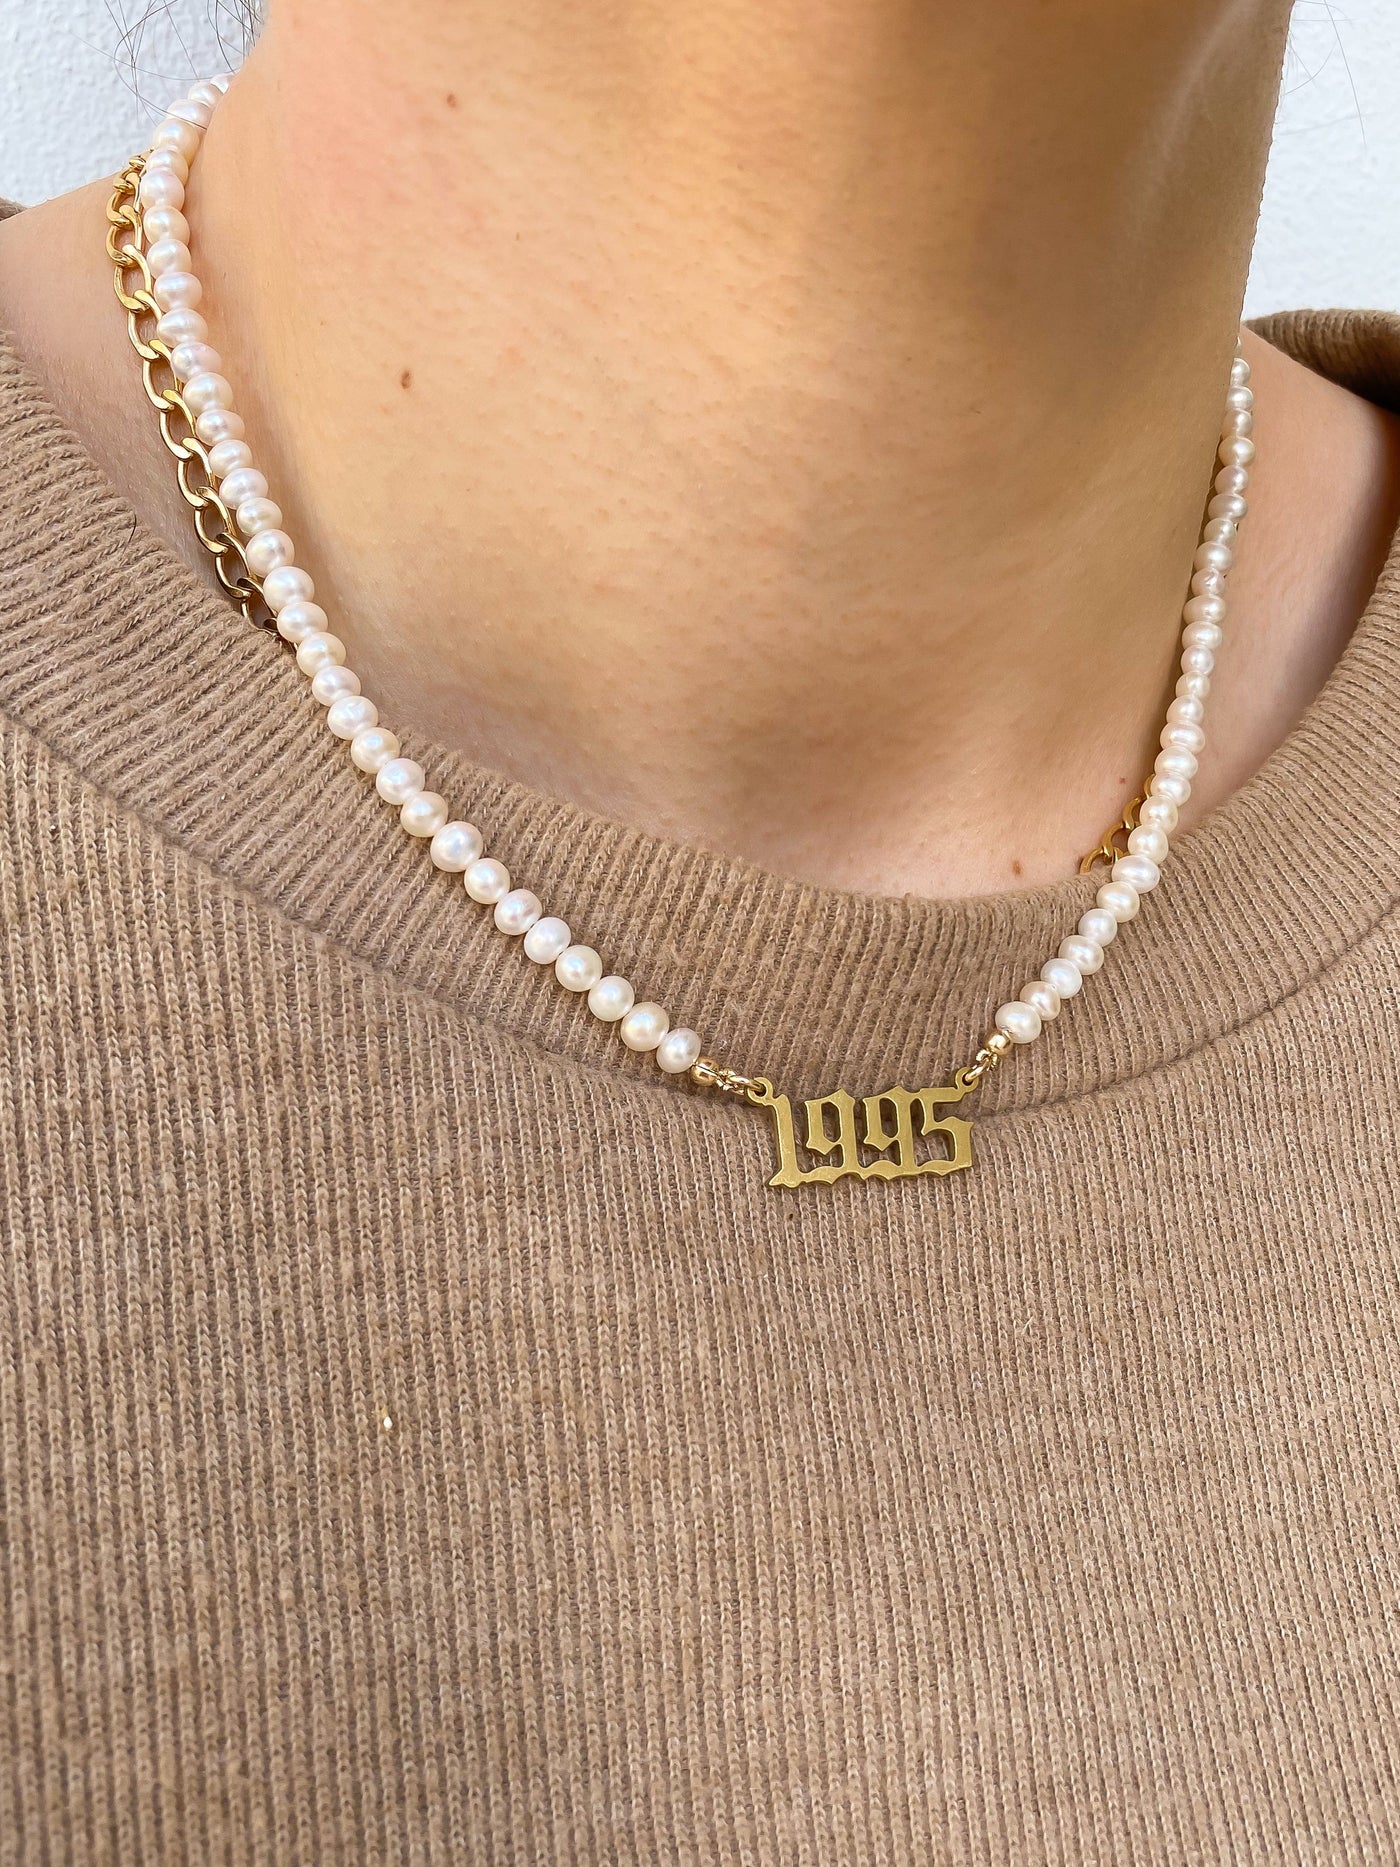 14K Gold Filled Birth Year Necklace LINK'D THE LABEL